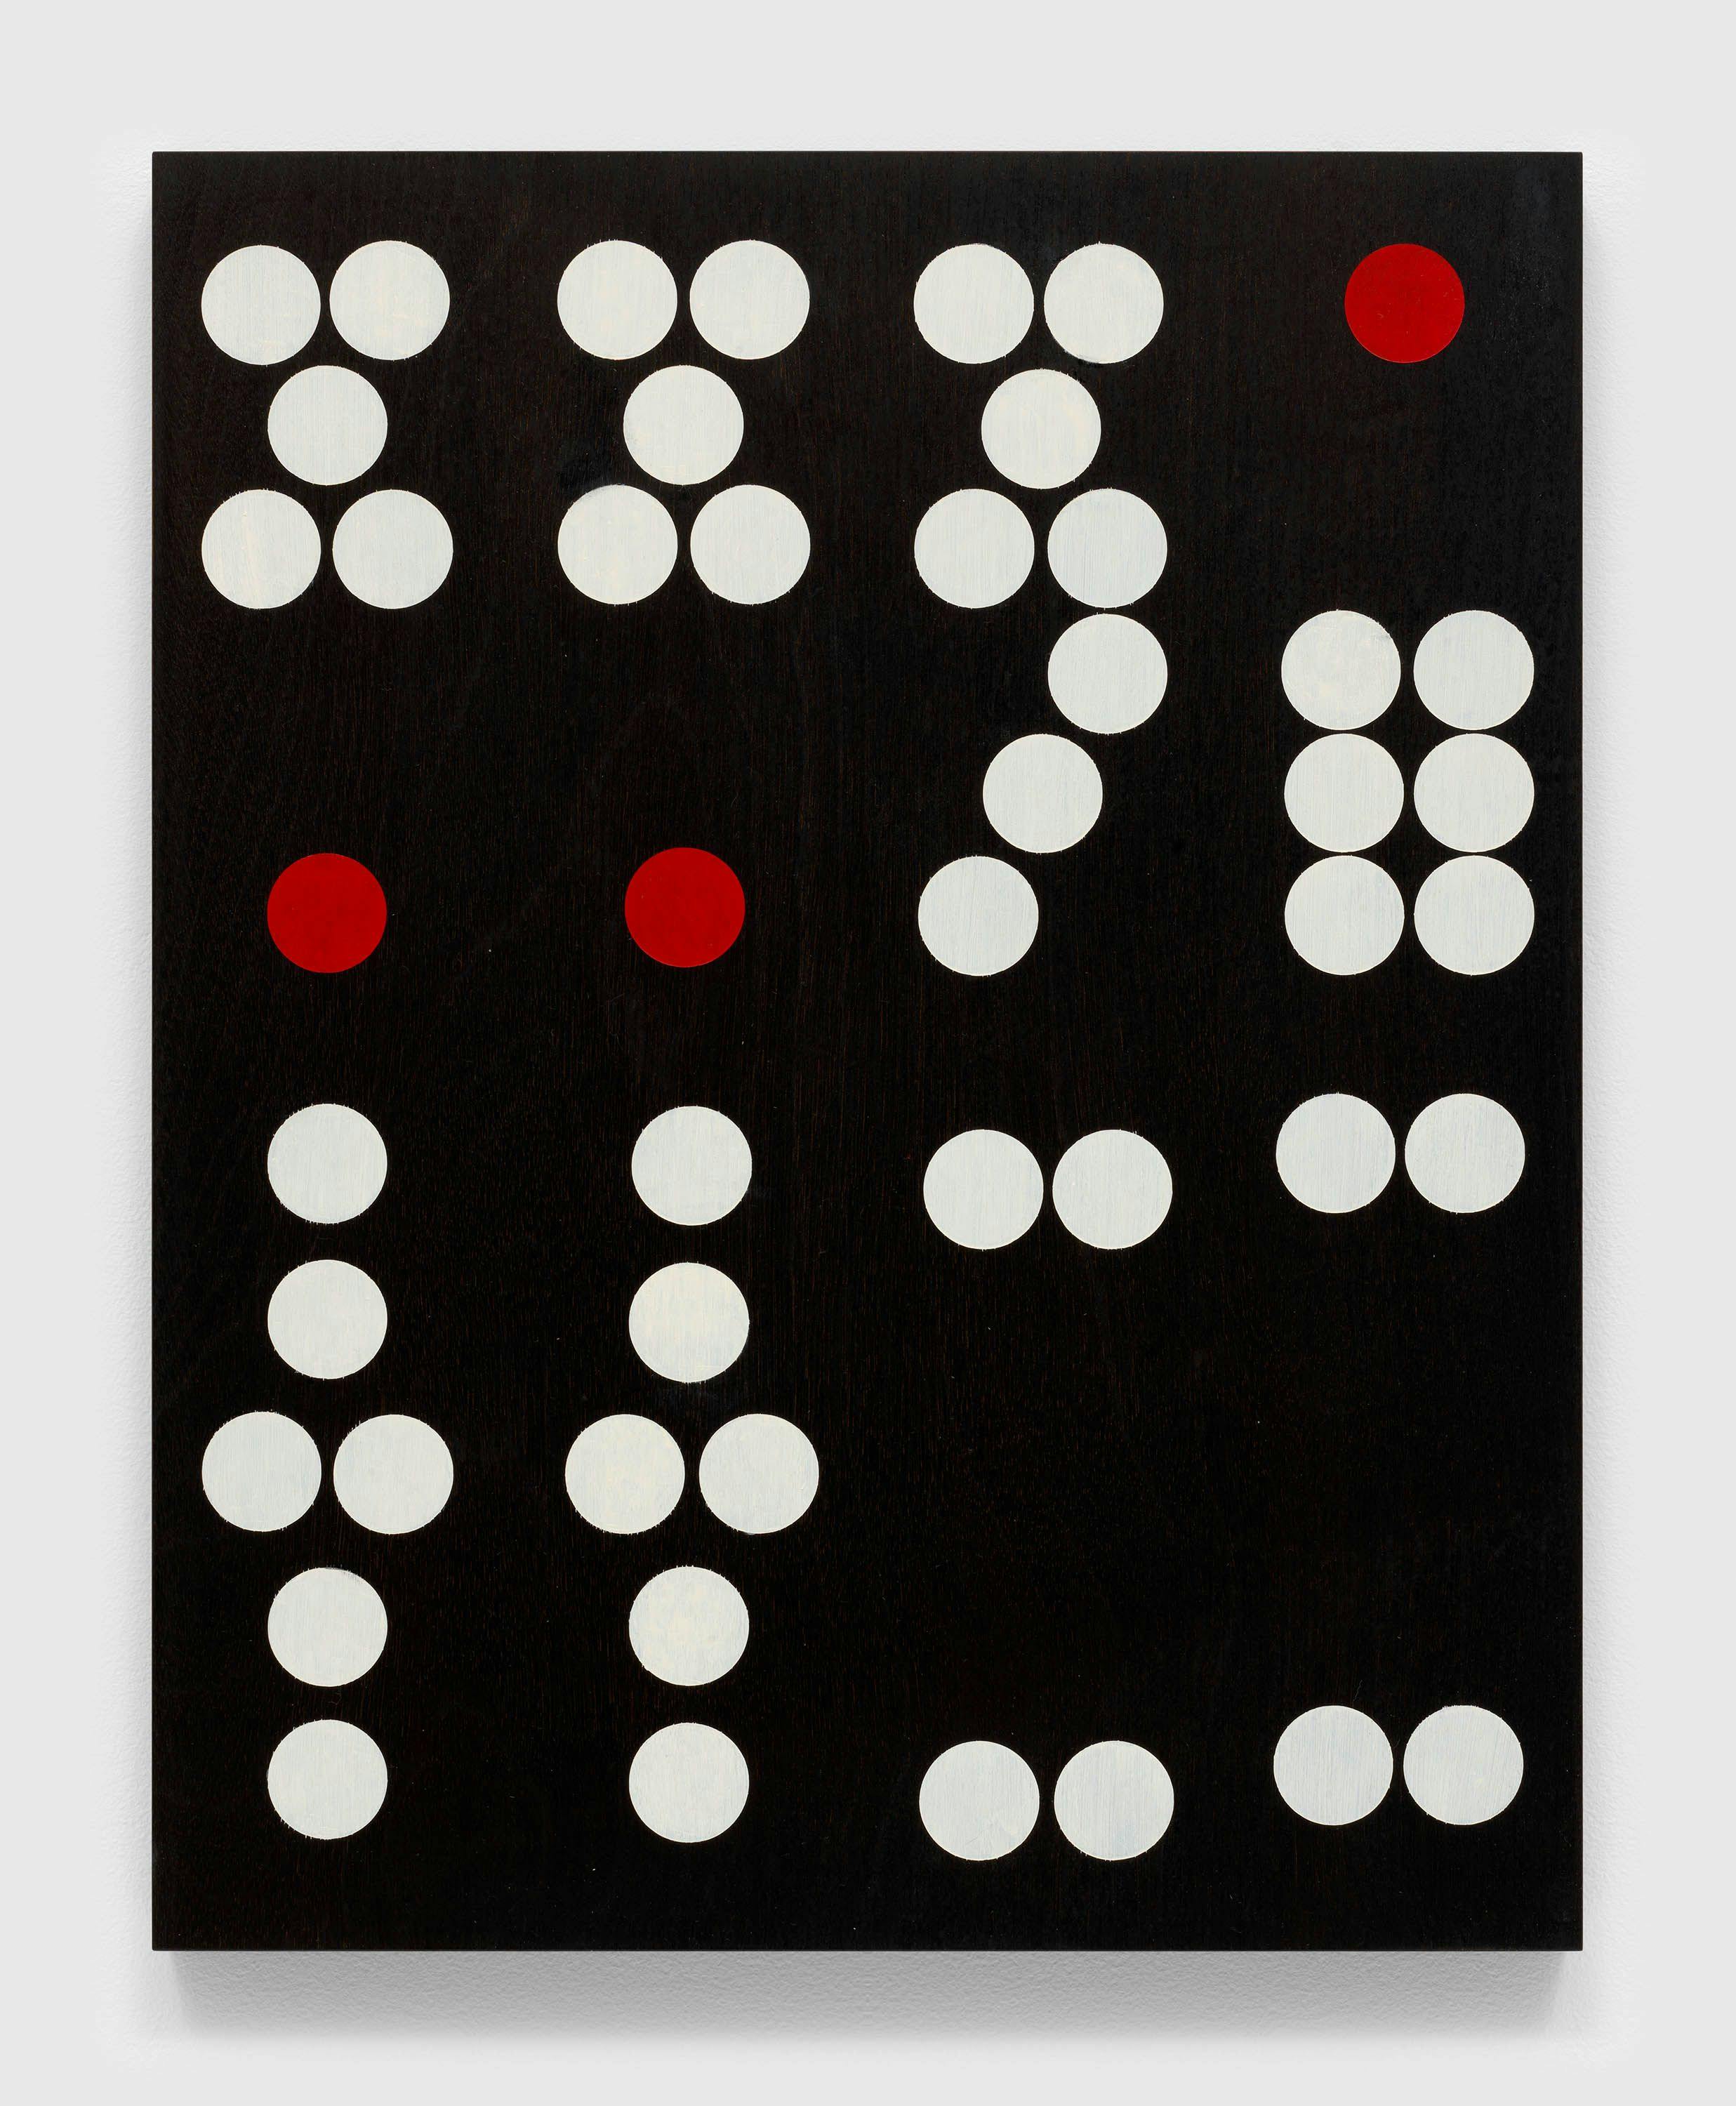 A painting by Sherrie Levine, titled Hong Kong Dominoes: 1-12, dated 2017.